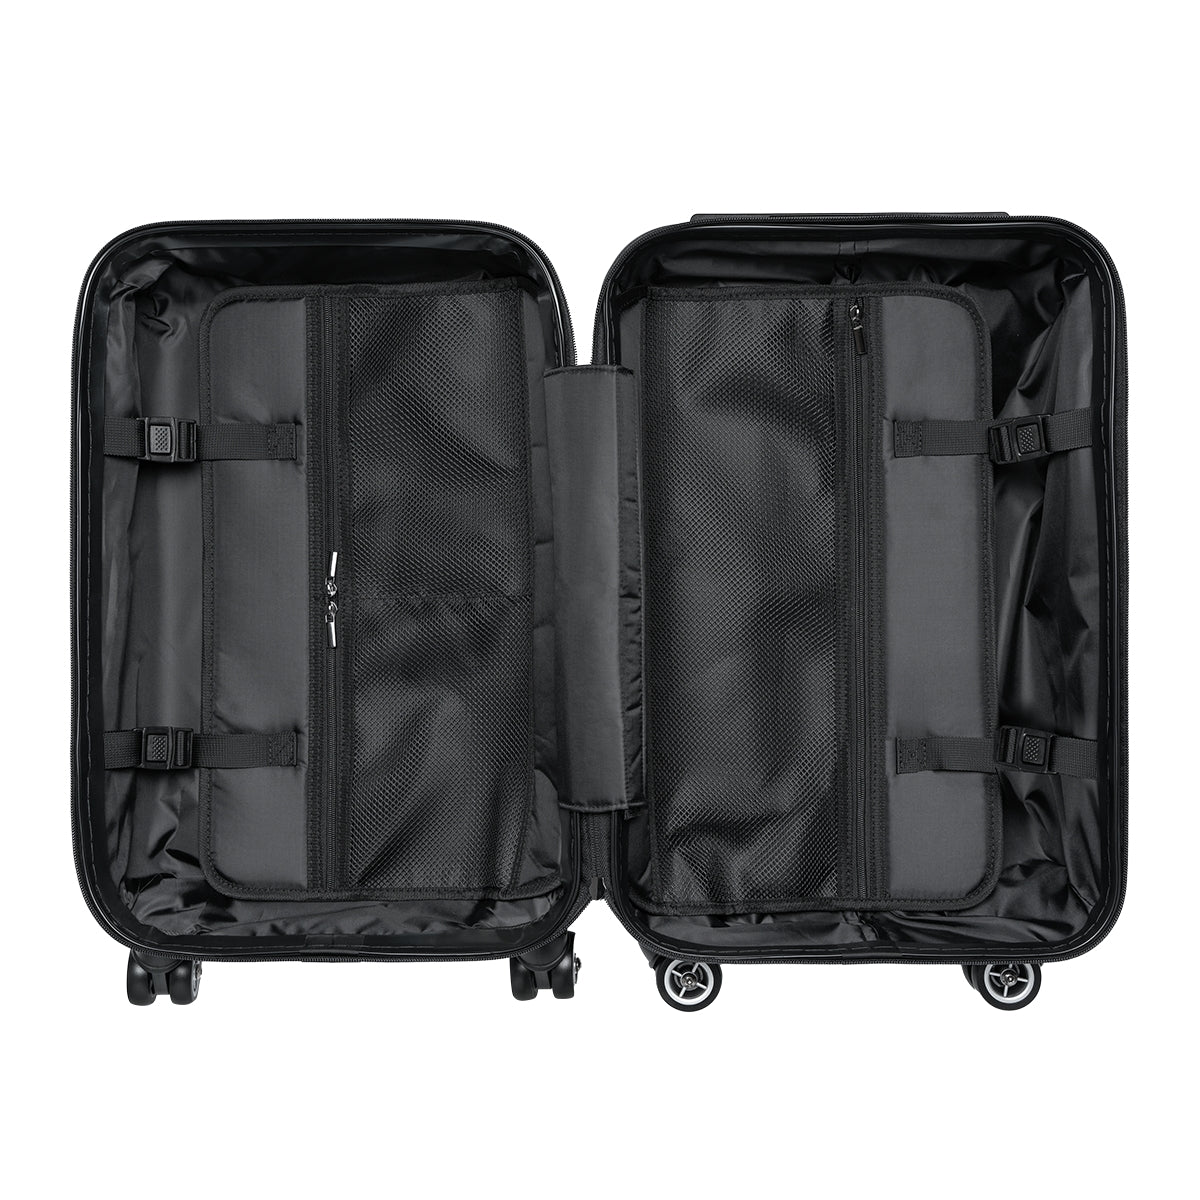 SUITCASE LUGGAGE SET, CARRY-ON FOR WOMEN, DOUBLE WHEELED SPINNER